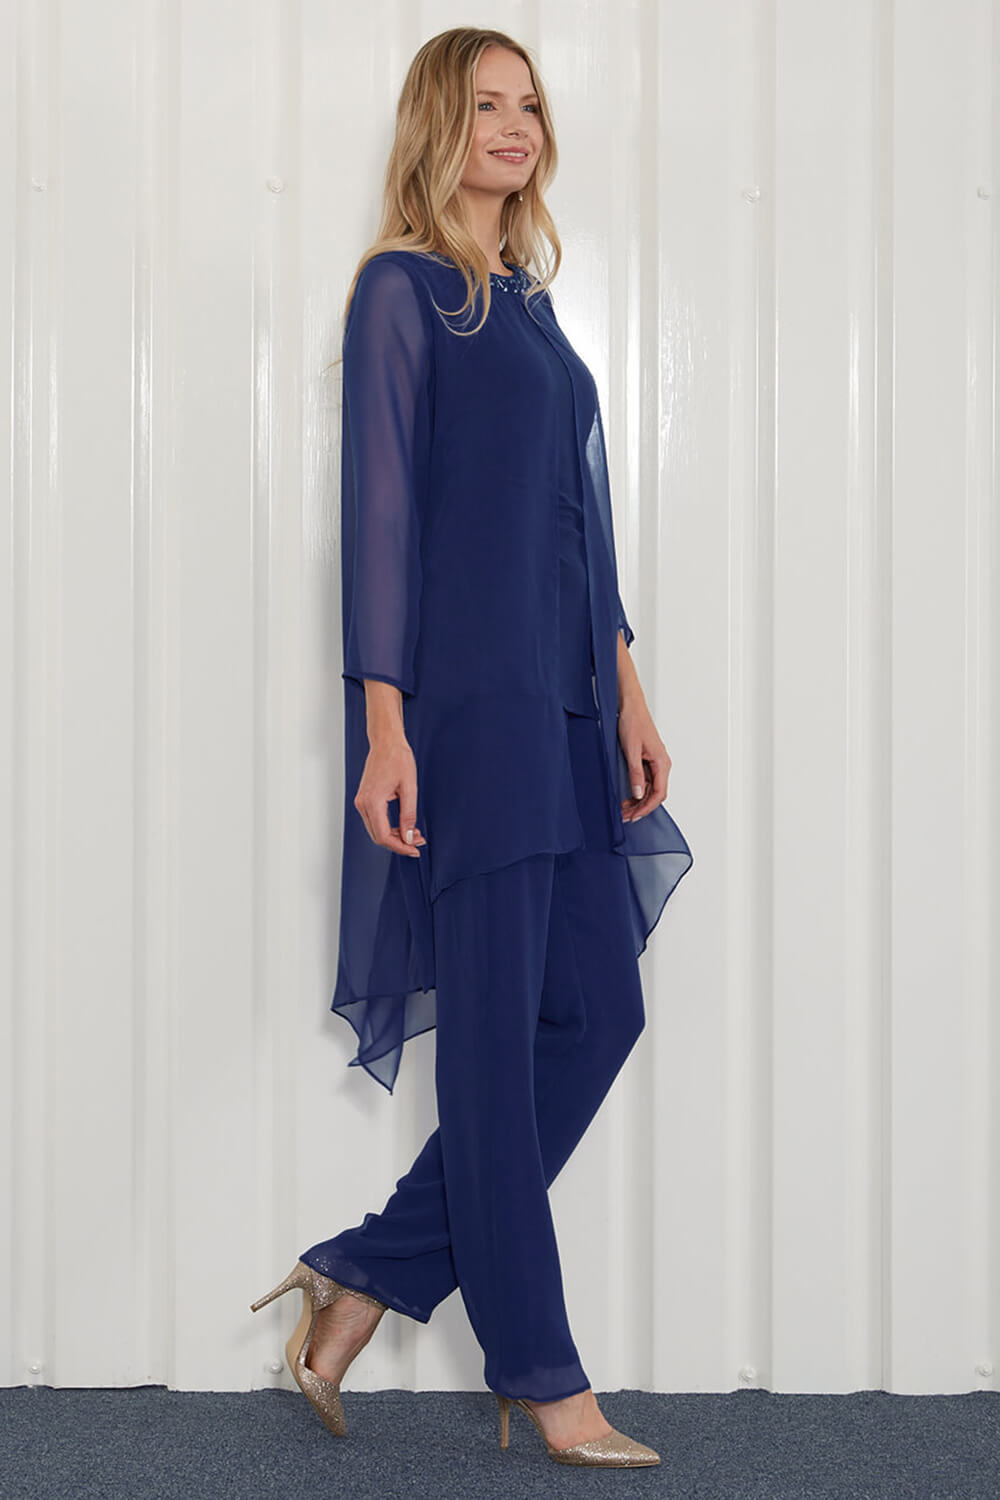 Occasion Wear Sale | Blessings of Brighton